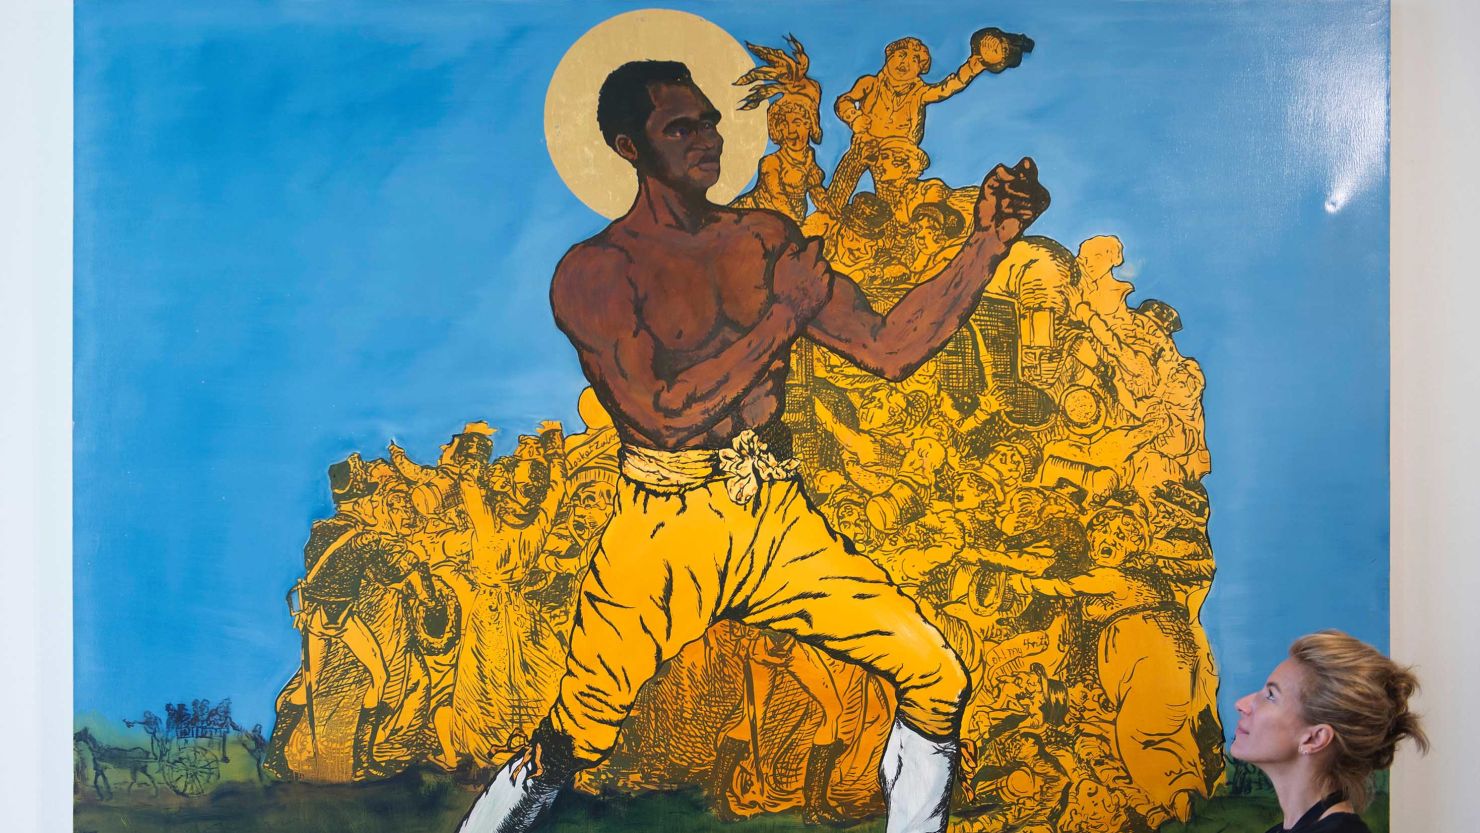 An artwork of boxer Bill Richmond, whose remains could be found during excavations to make way for a high-speed train line.